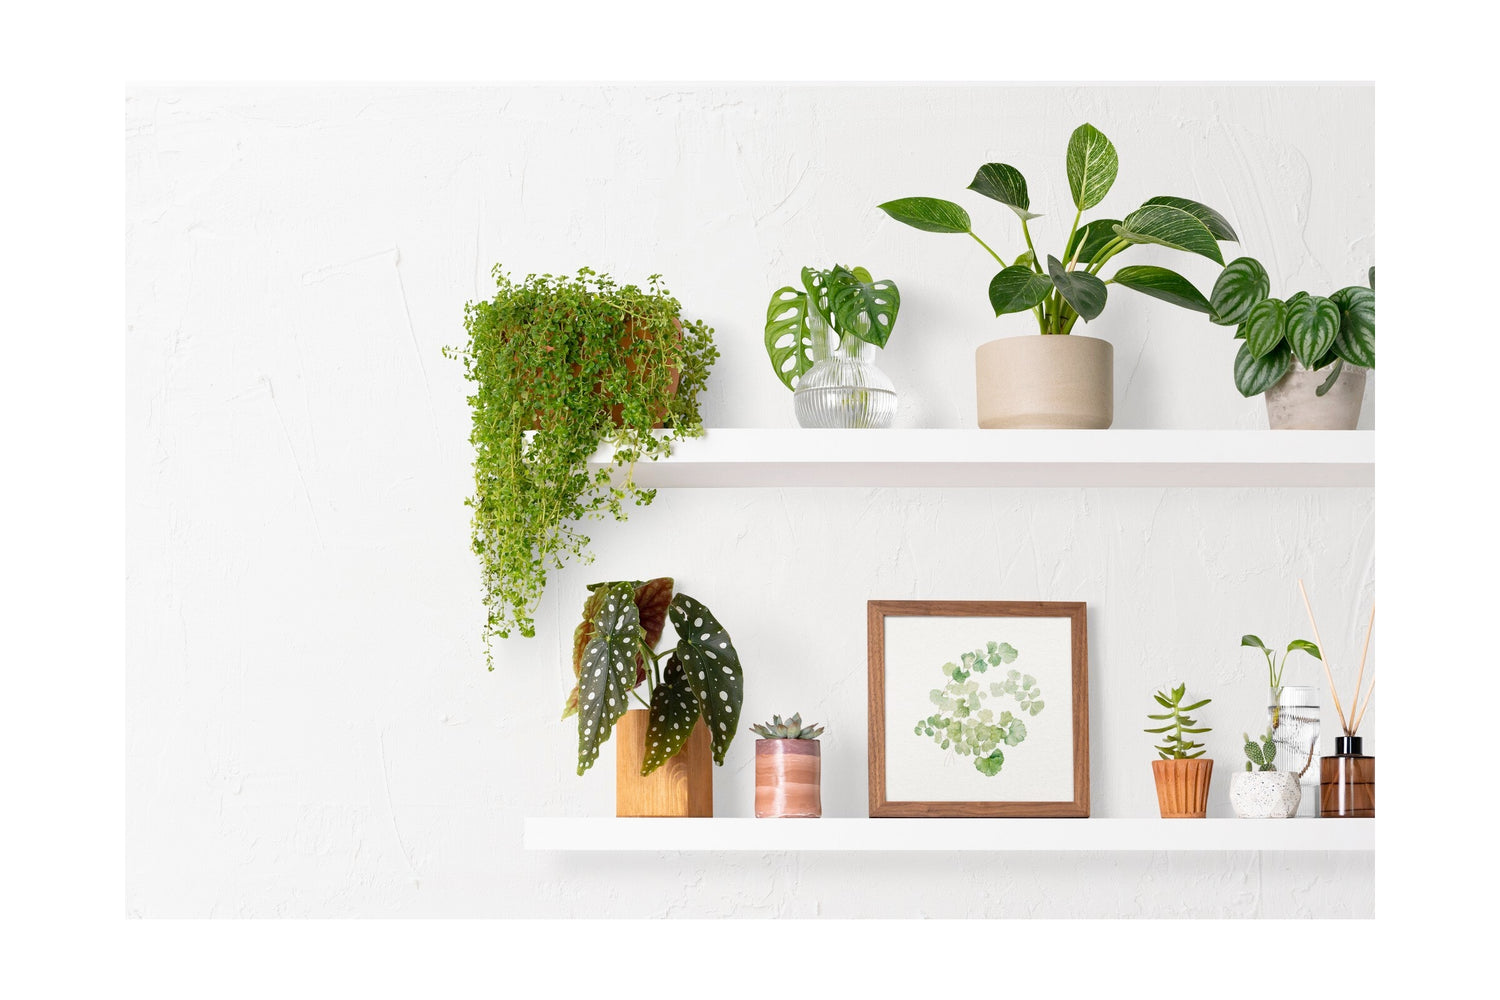 Houseplants for a Healthy Home Environment - Leaf Culture